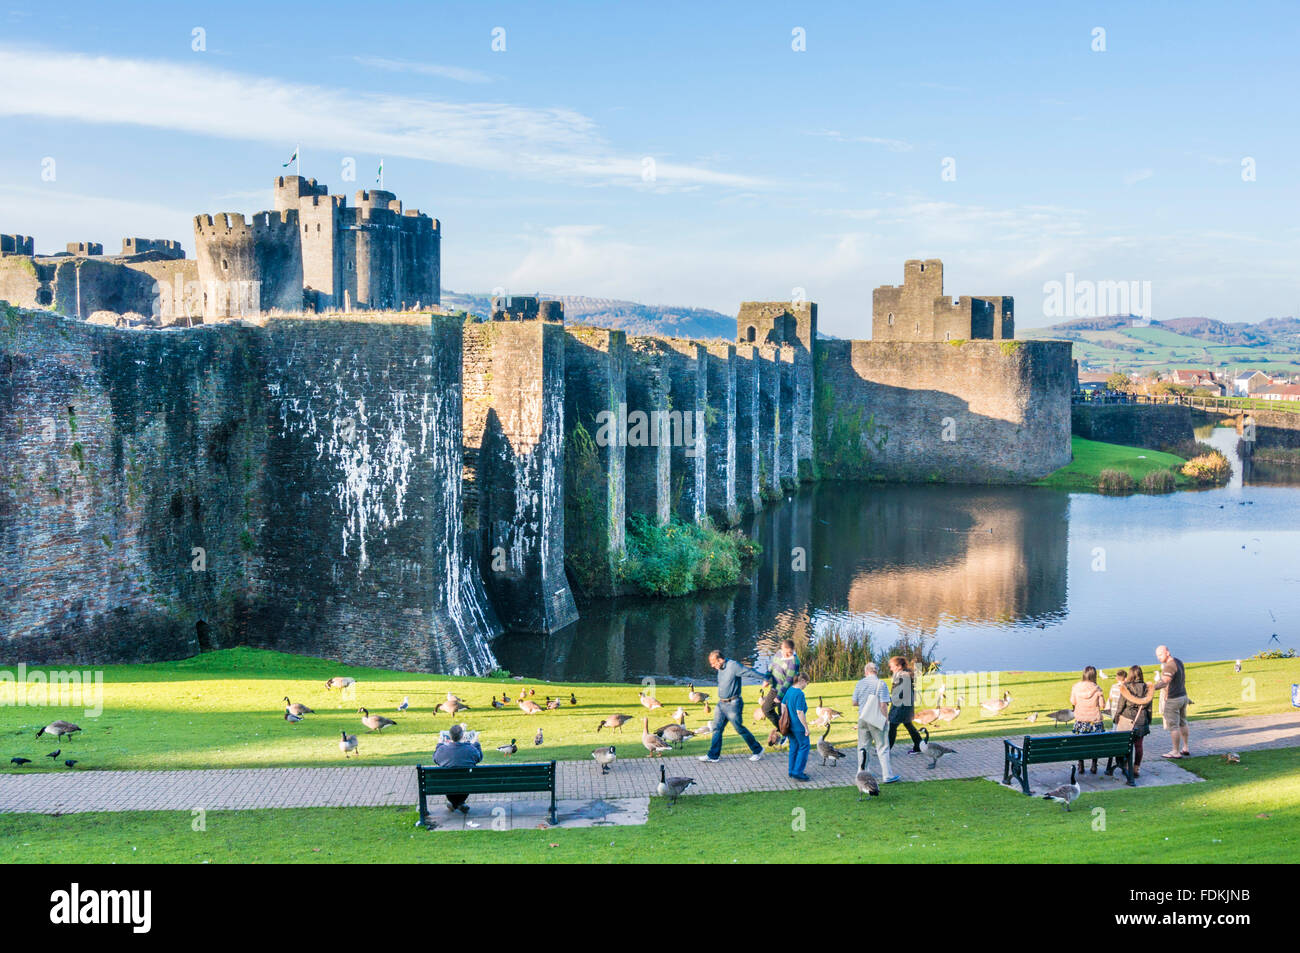 People walking around outside Caerphilly castle a Medieval castle with moat in Caerphilly South Glamorgan South Wales GB UK Europe Stock Photo